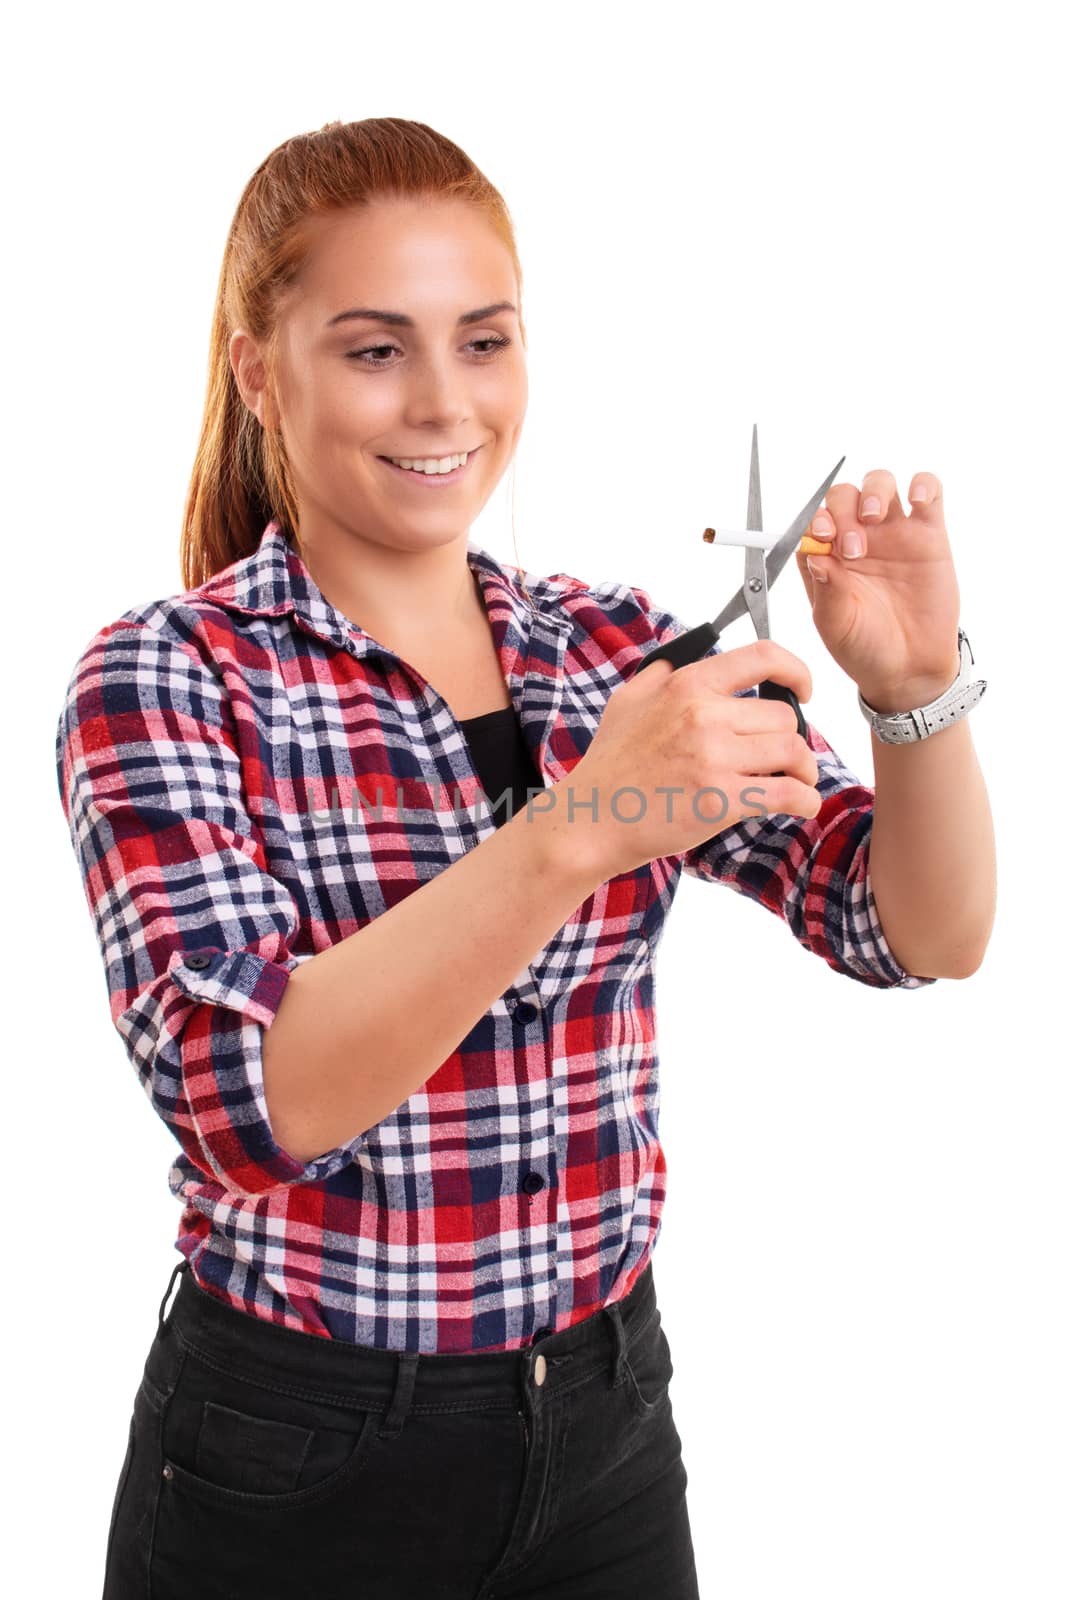 Redhead woman smiling and cutting a cigarette with scissors by Mendelex